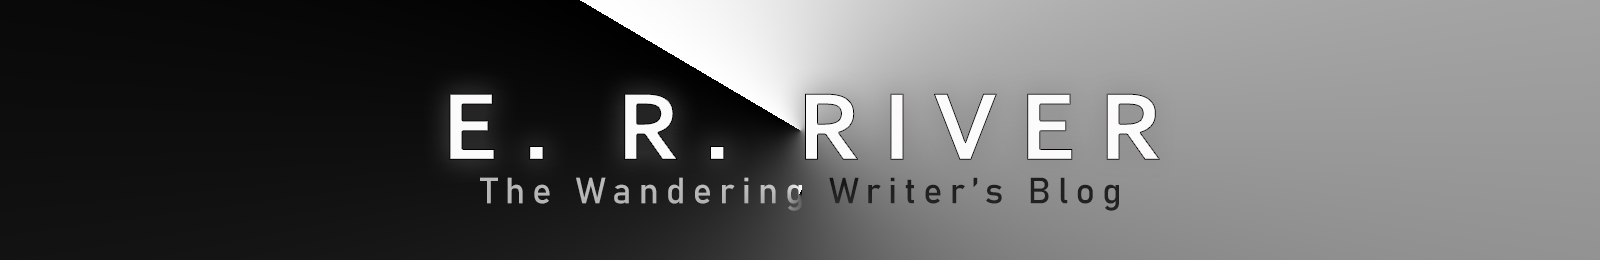 E.R. River - The Wandering Writer's Blog